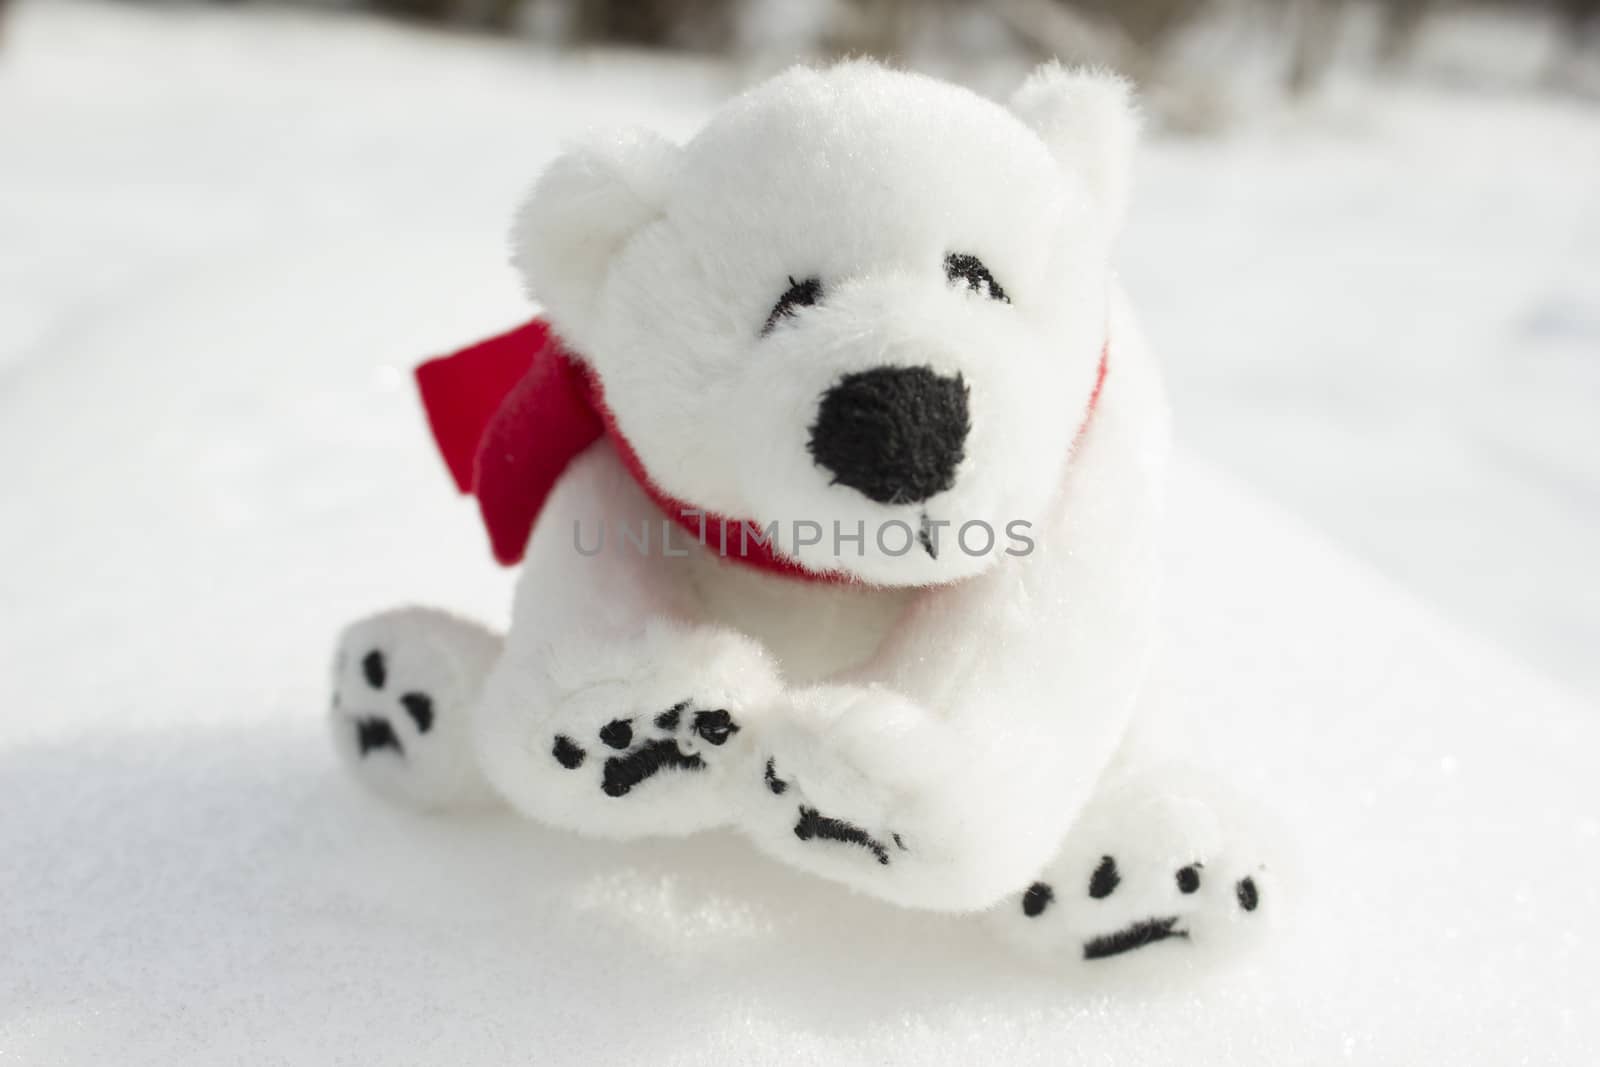 Toy teddy bear with red scarf sitting in the snow.